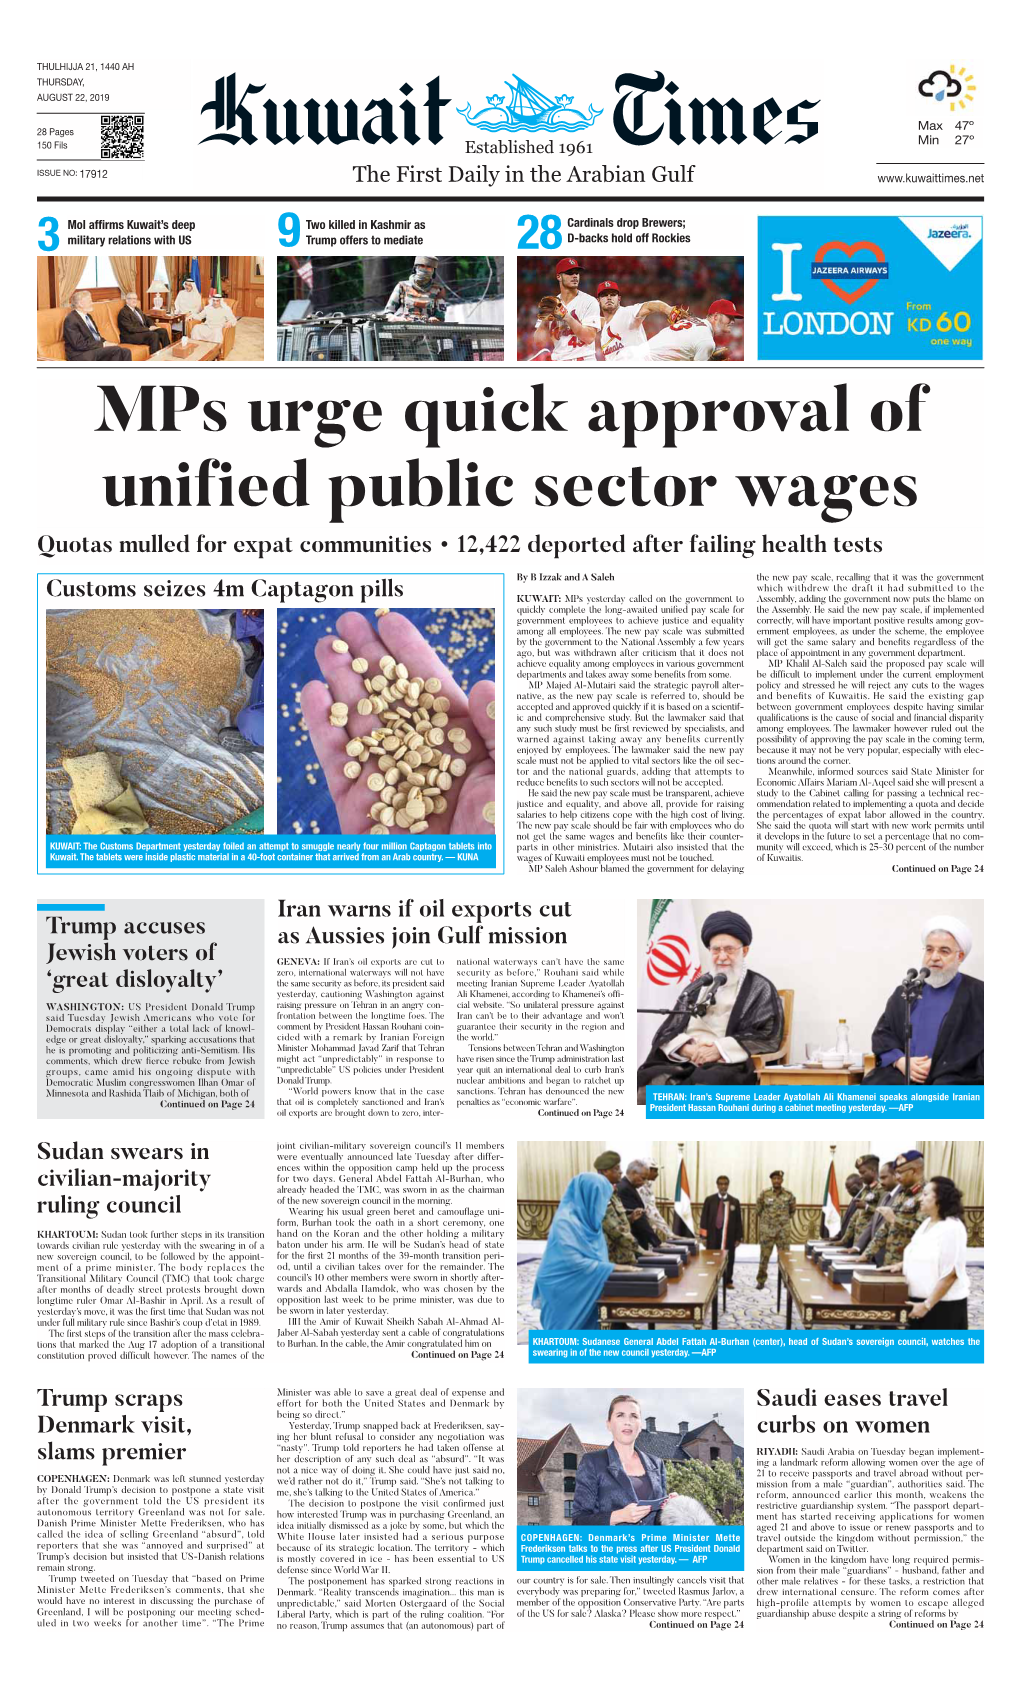 Mps Urge Quick Approval of Unified Public Sector Wages Quotas Mulled for Expat Communities • 12,422 Deported After Failing Health Tests